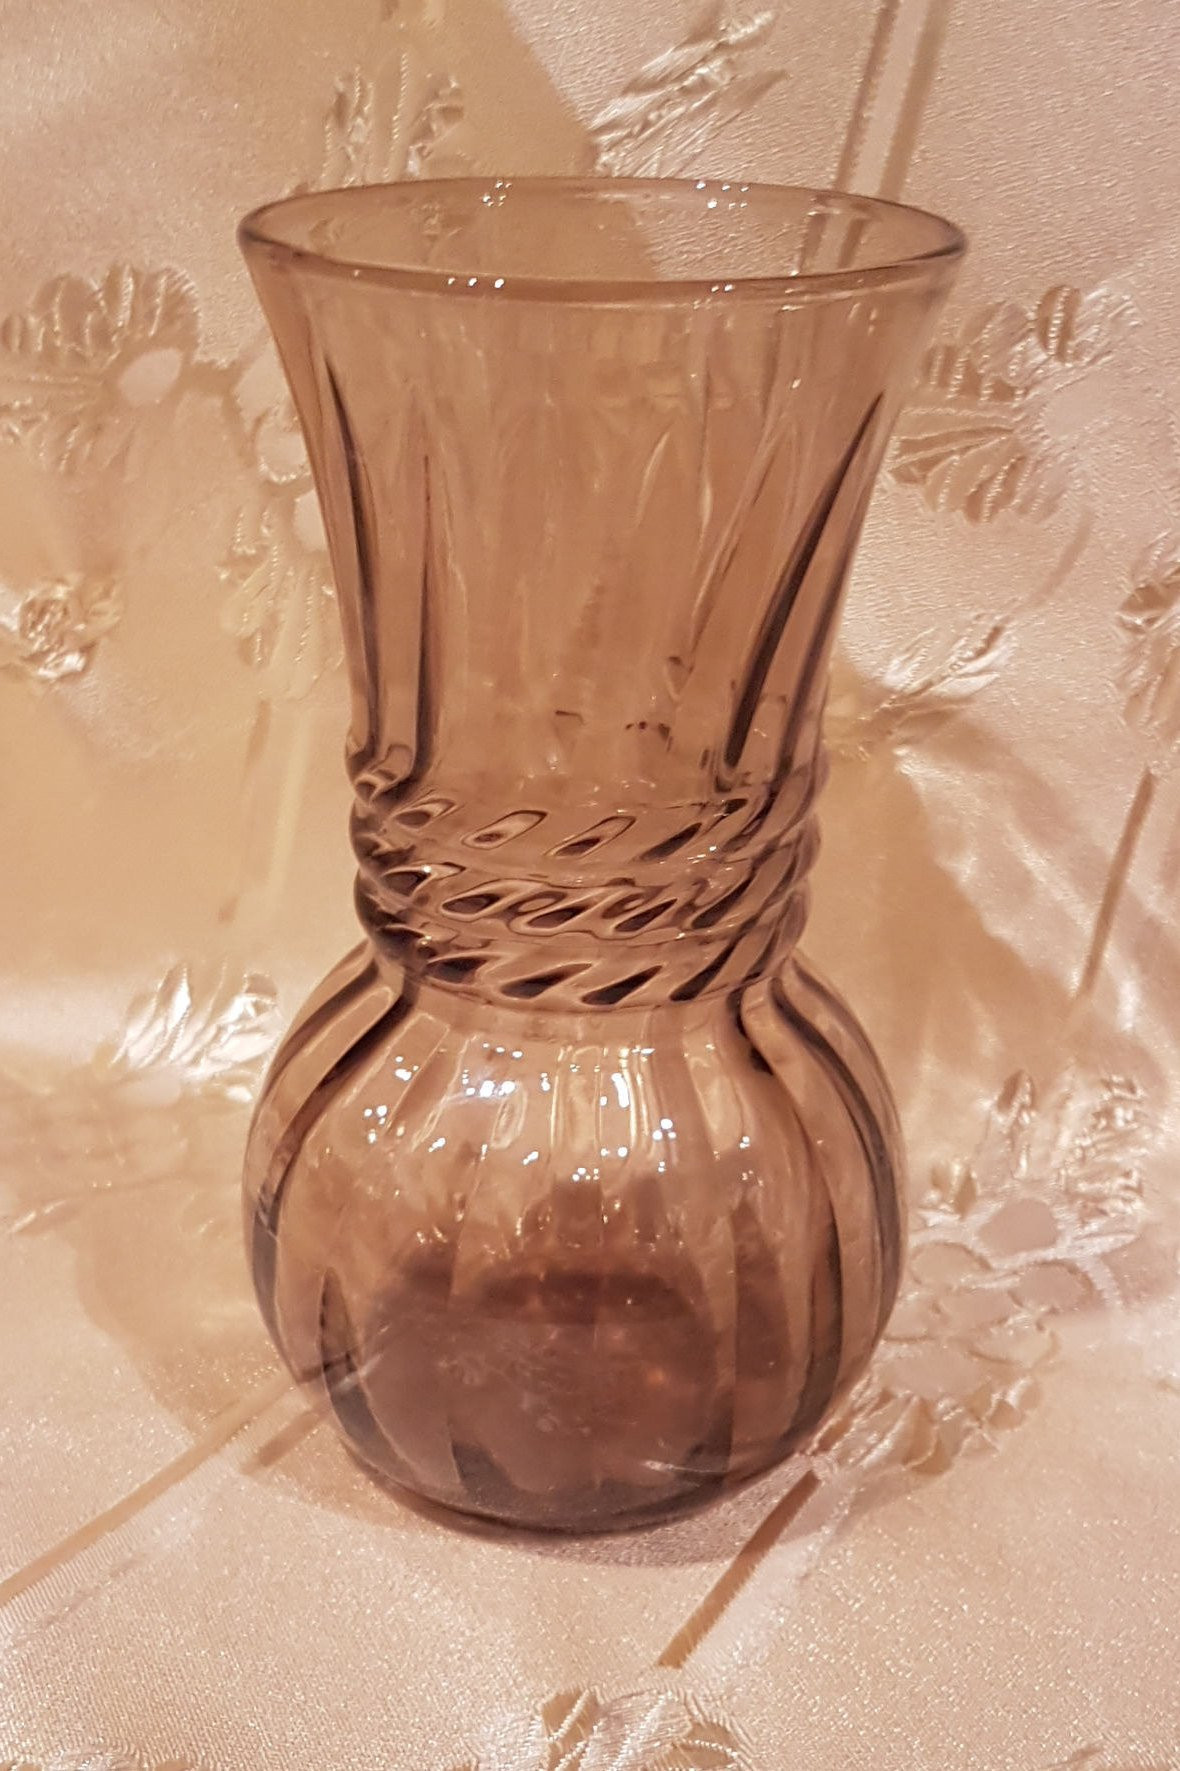 11 Great 2 Foot Tall Glass Vases 2024 free download 2 foot tall glass vases of anchor hocking vintage smoke brown optic swirl glass vase pertaining to il fullxfull 1478201037 65uu